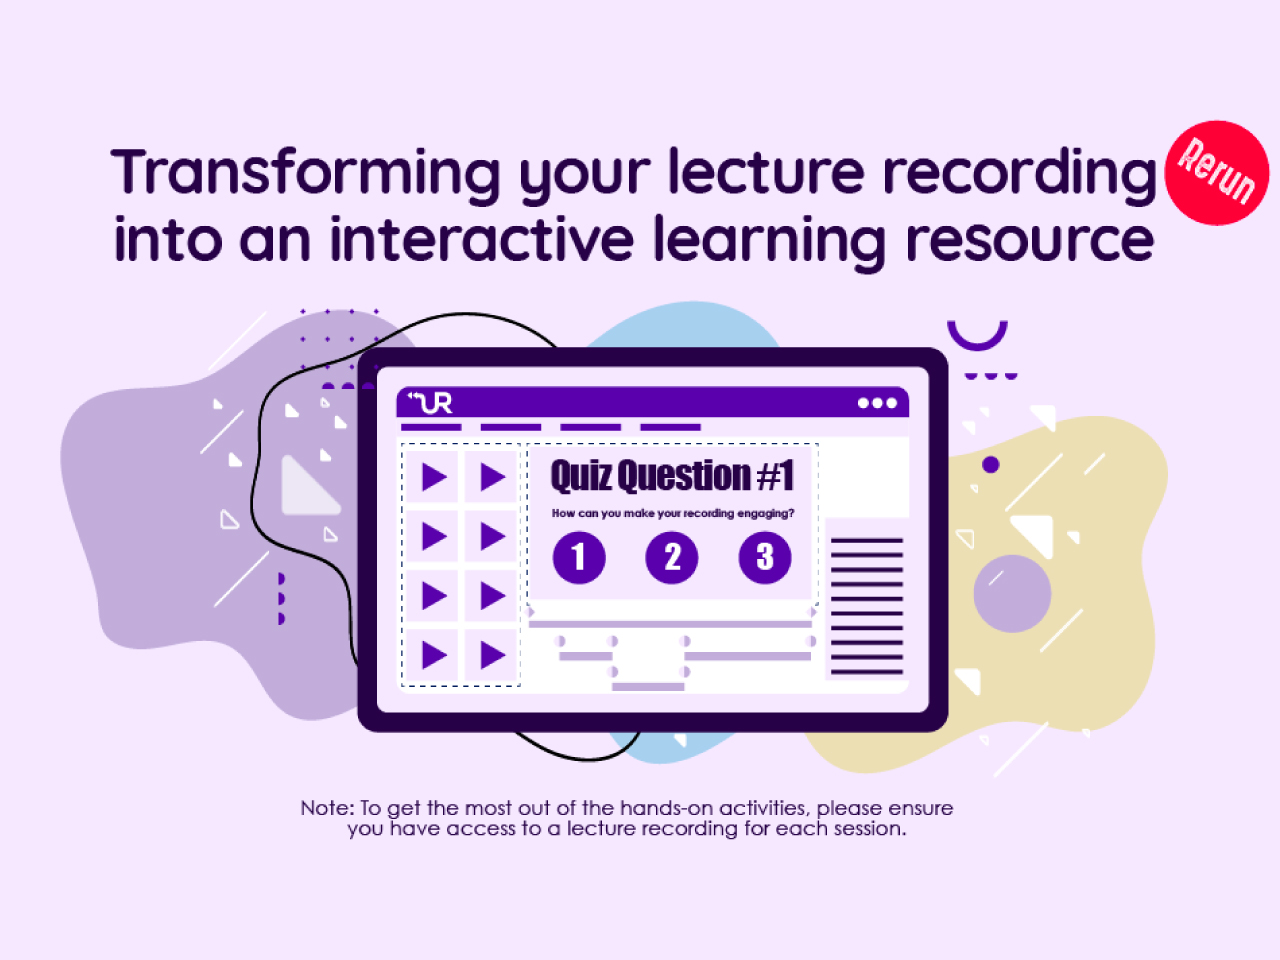 Transforming your lecture recording into an interactive learning resource (Part II) (Re-run)  - Promoting active engagement